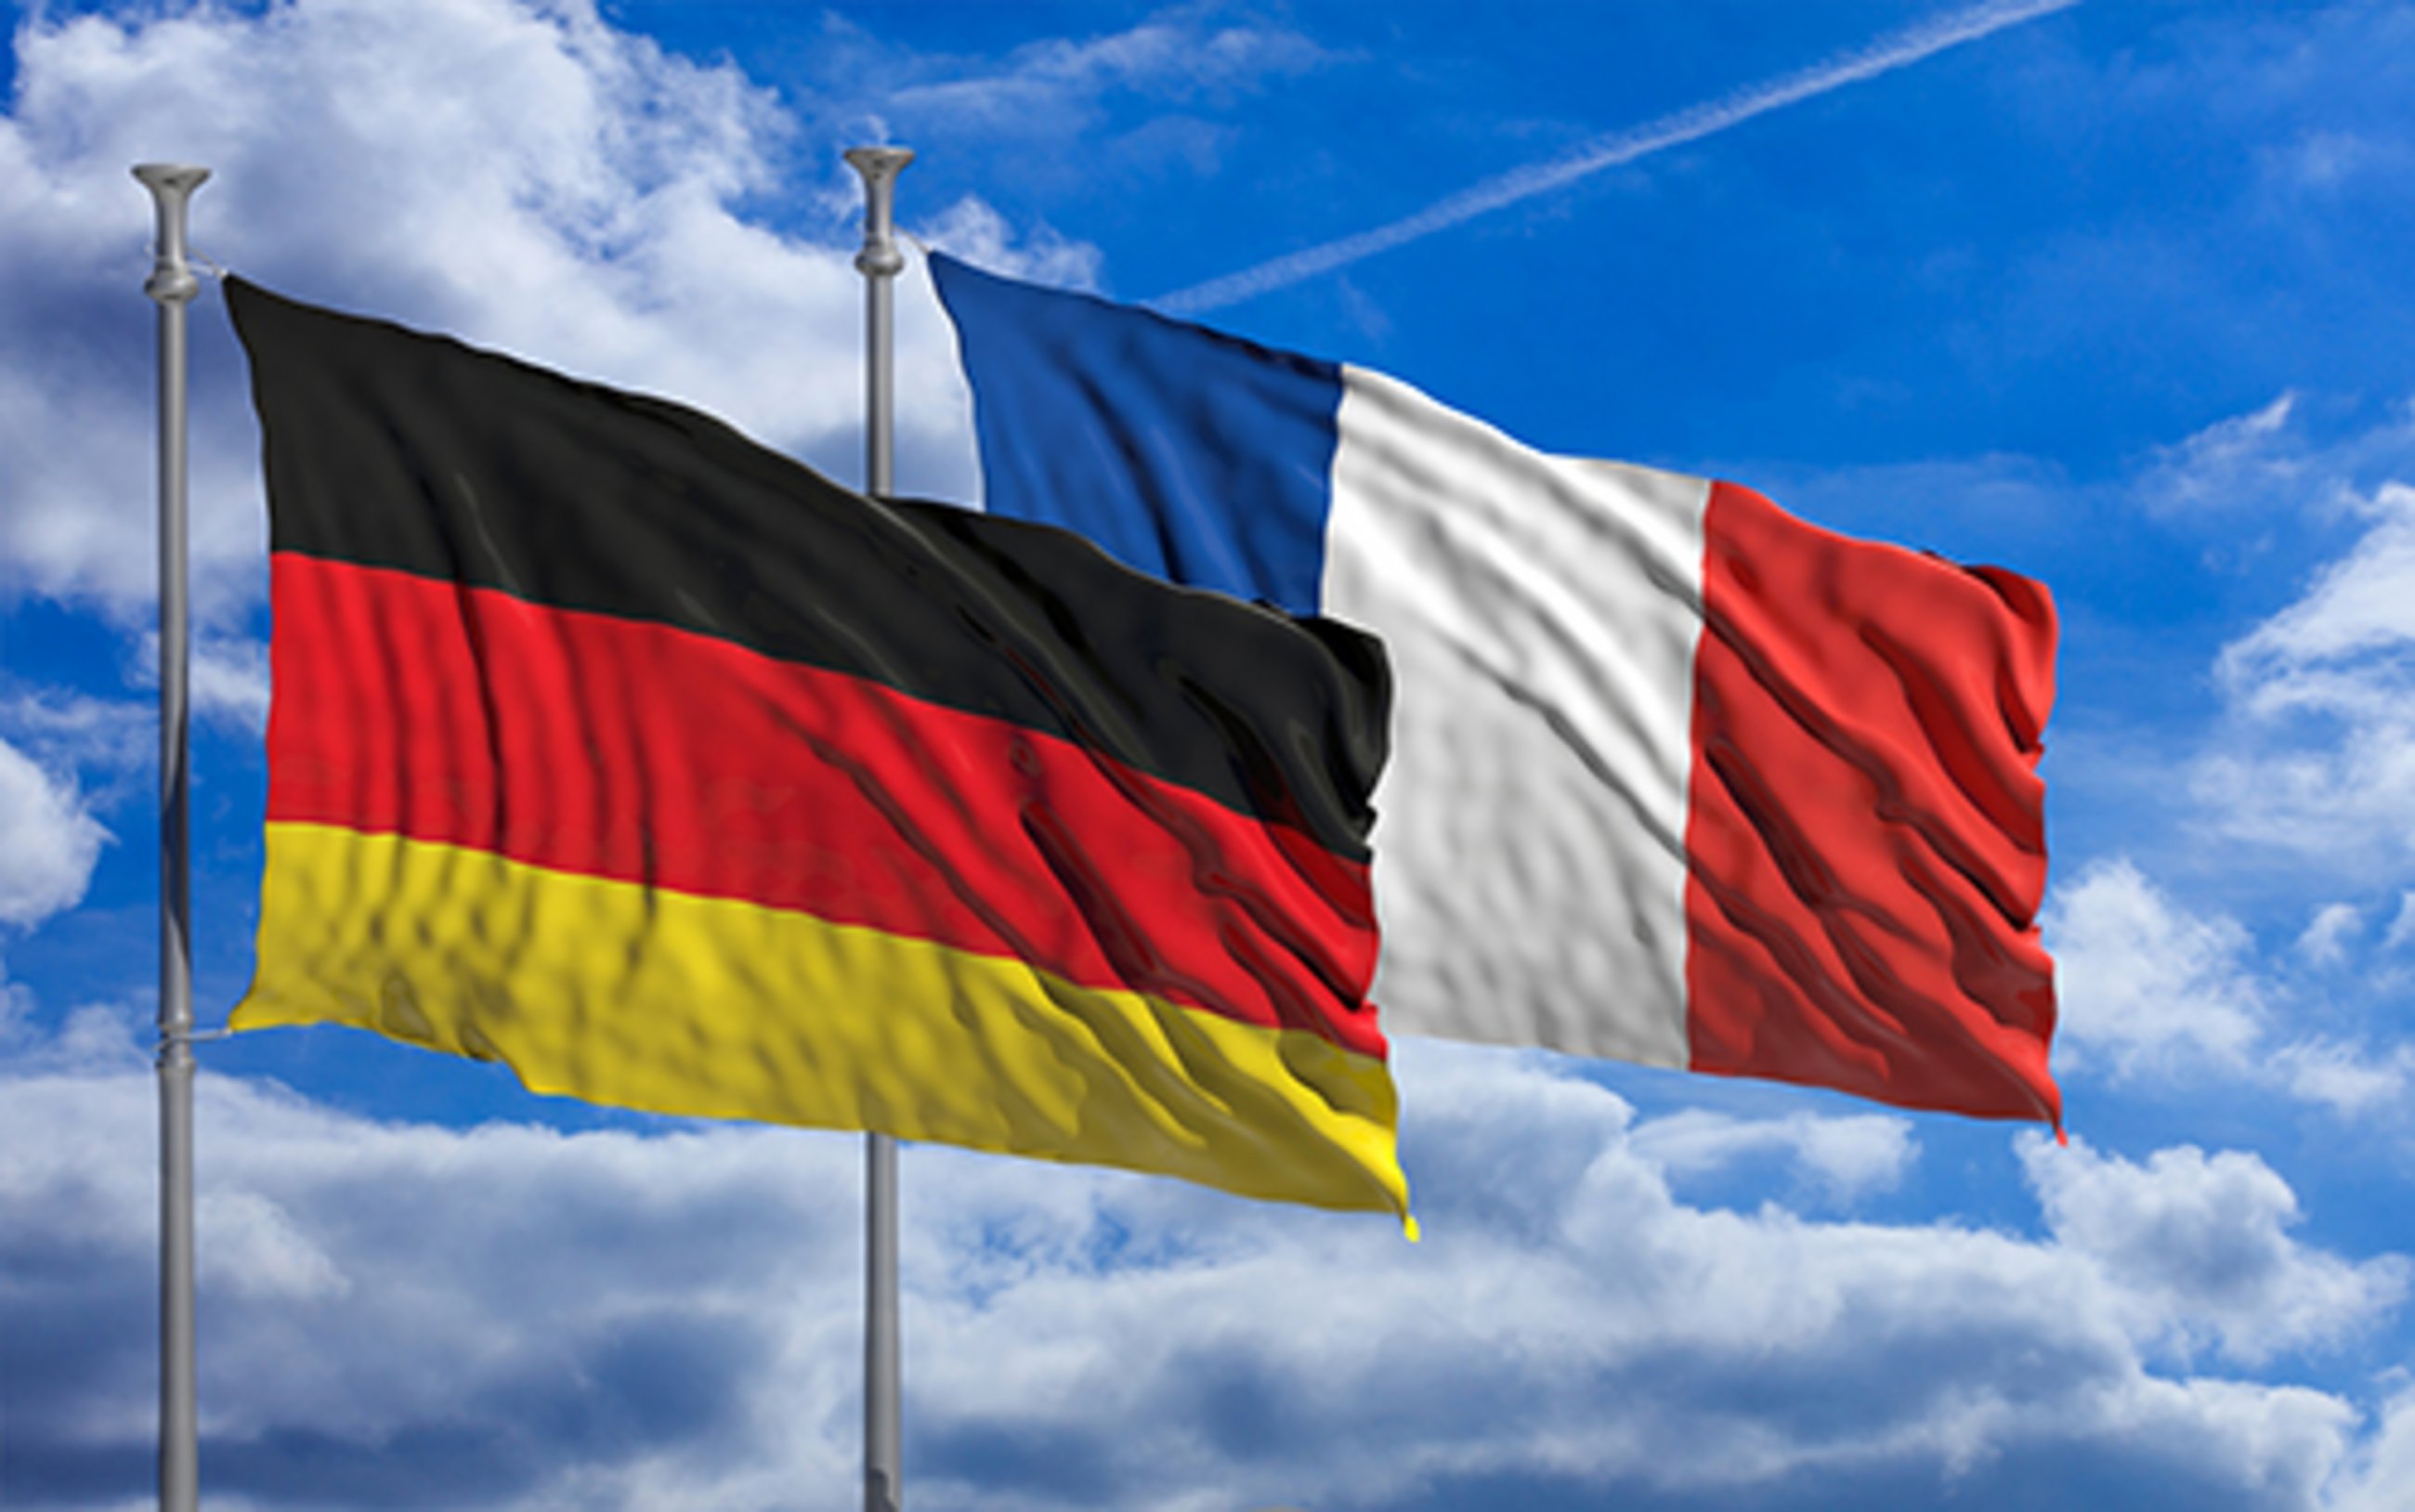 Carbon Pricing in France & Germany (cepInput)